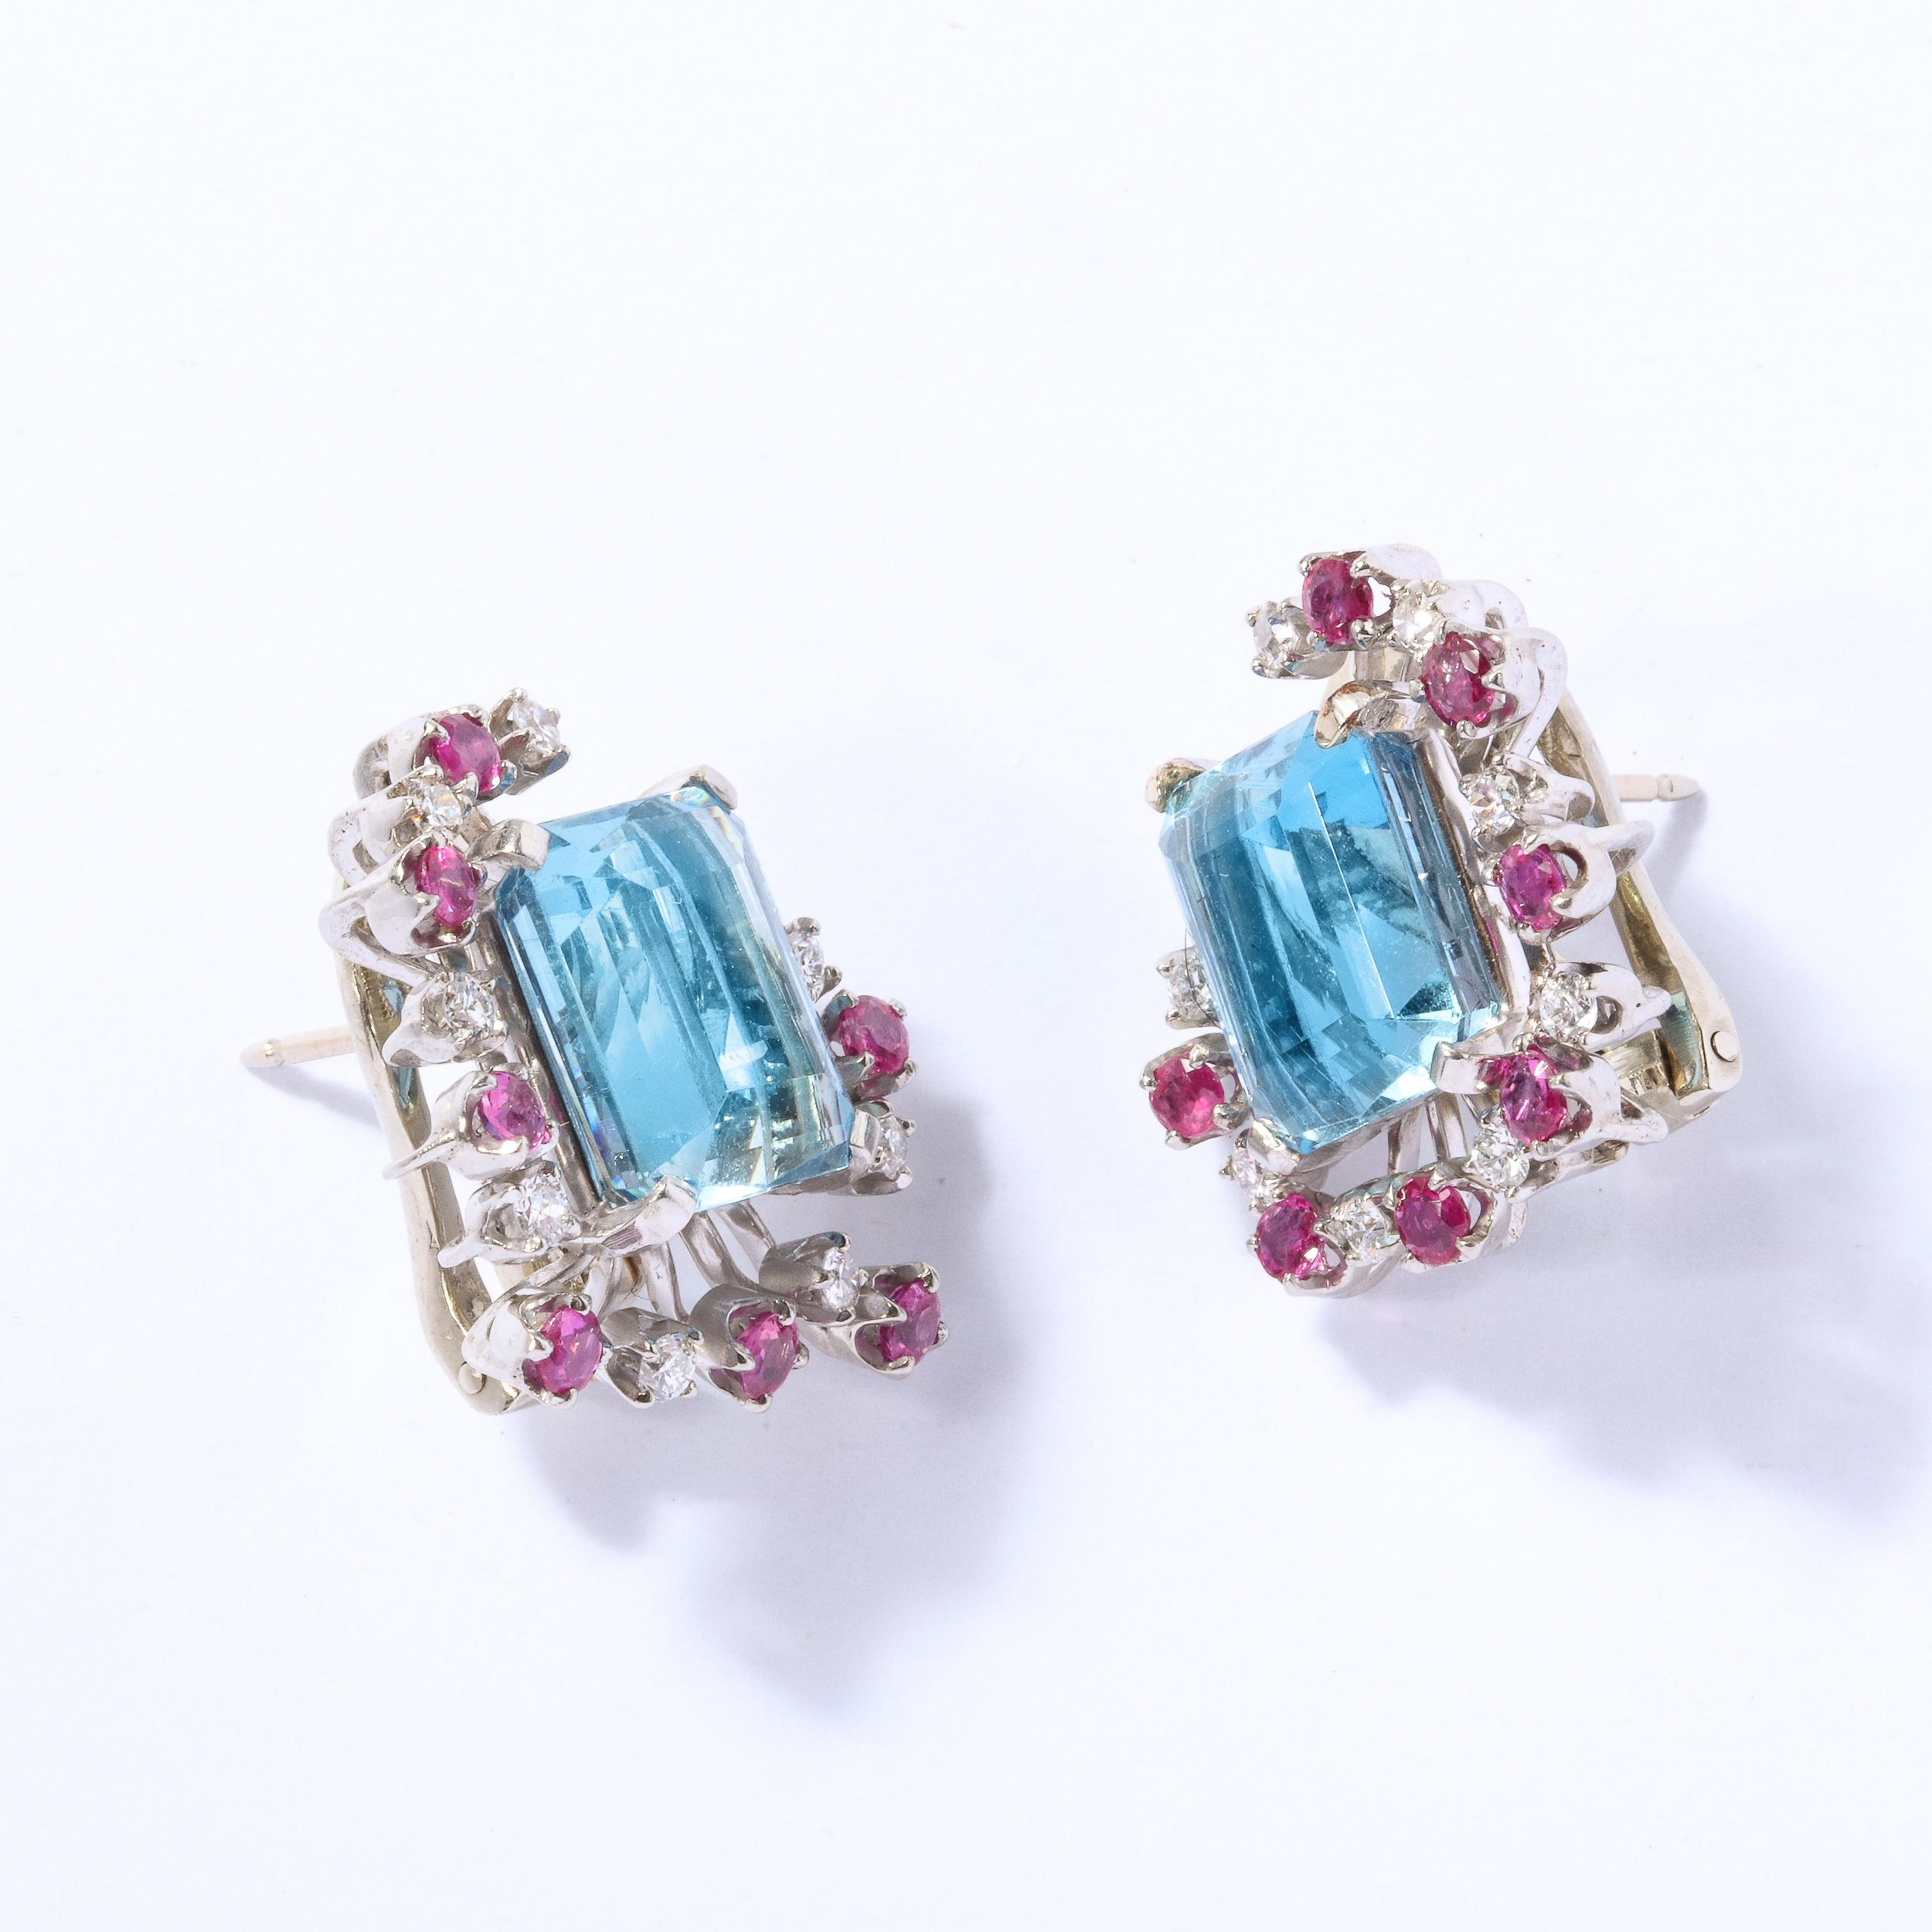 1940s 12 Carat Aquamarine and 14K White Gold Earrings with Diamonds and Rubies For Sale 6